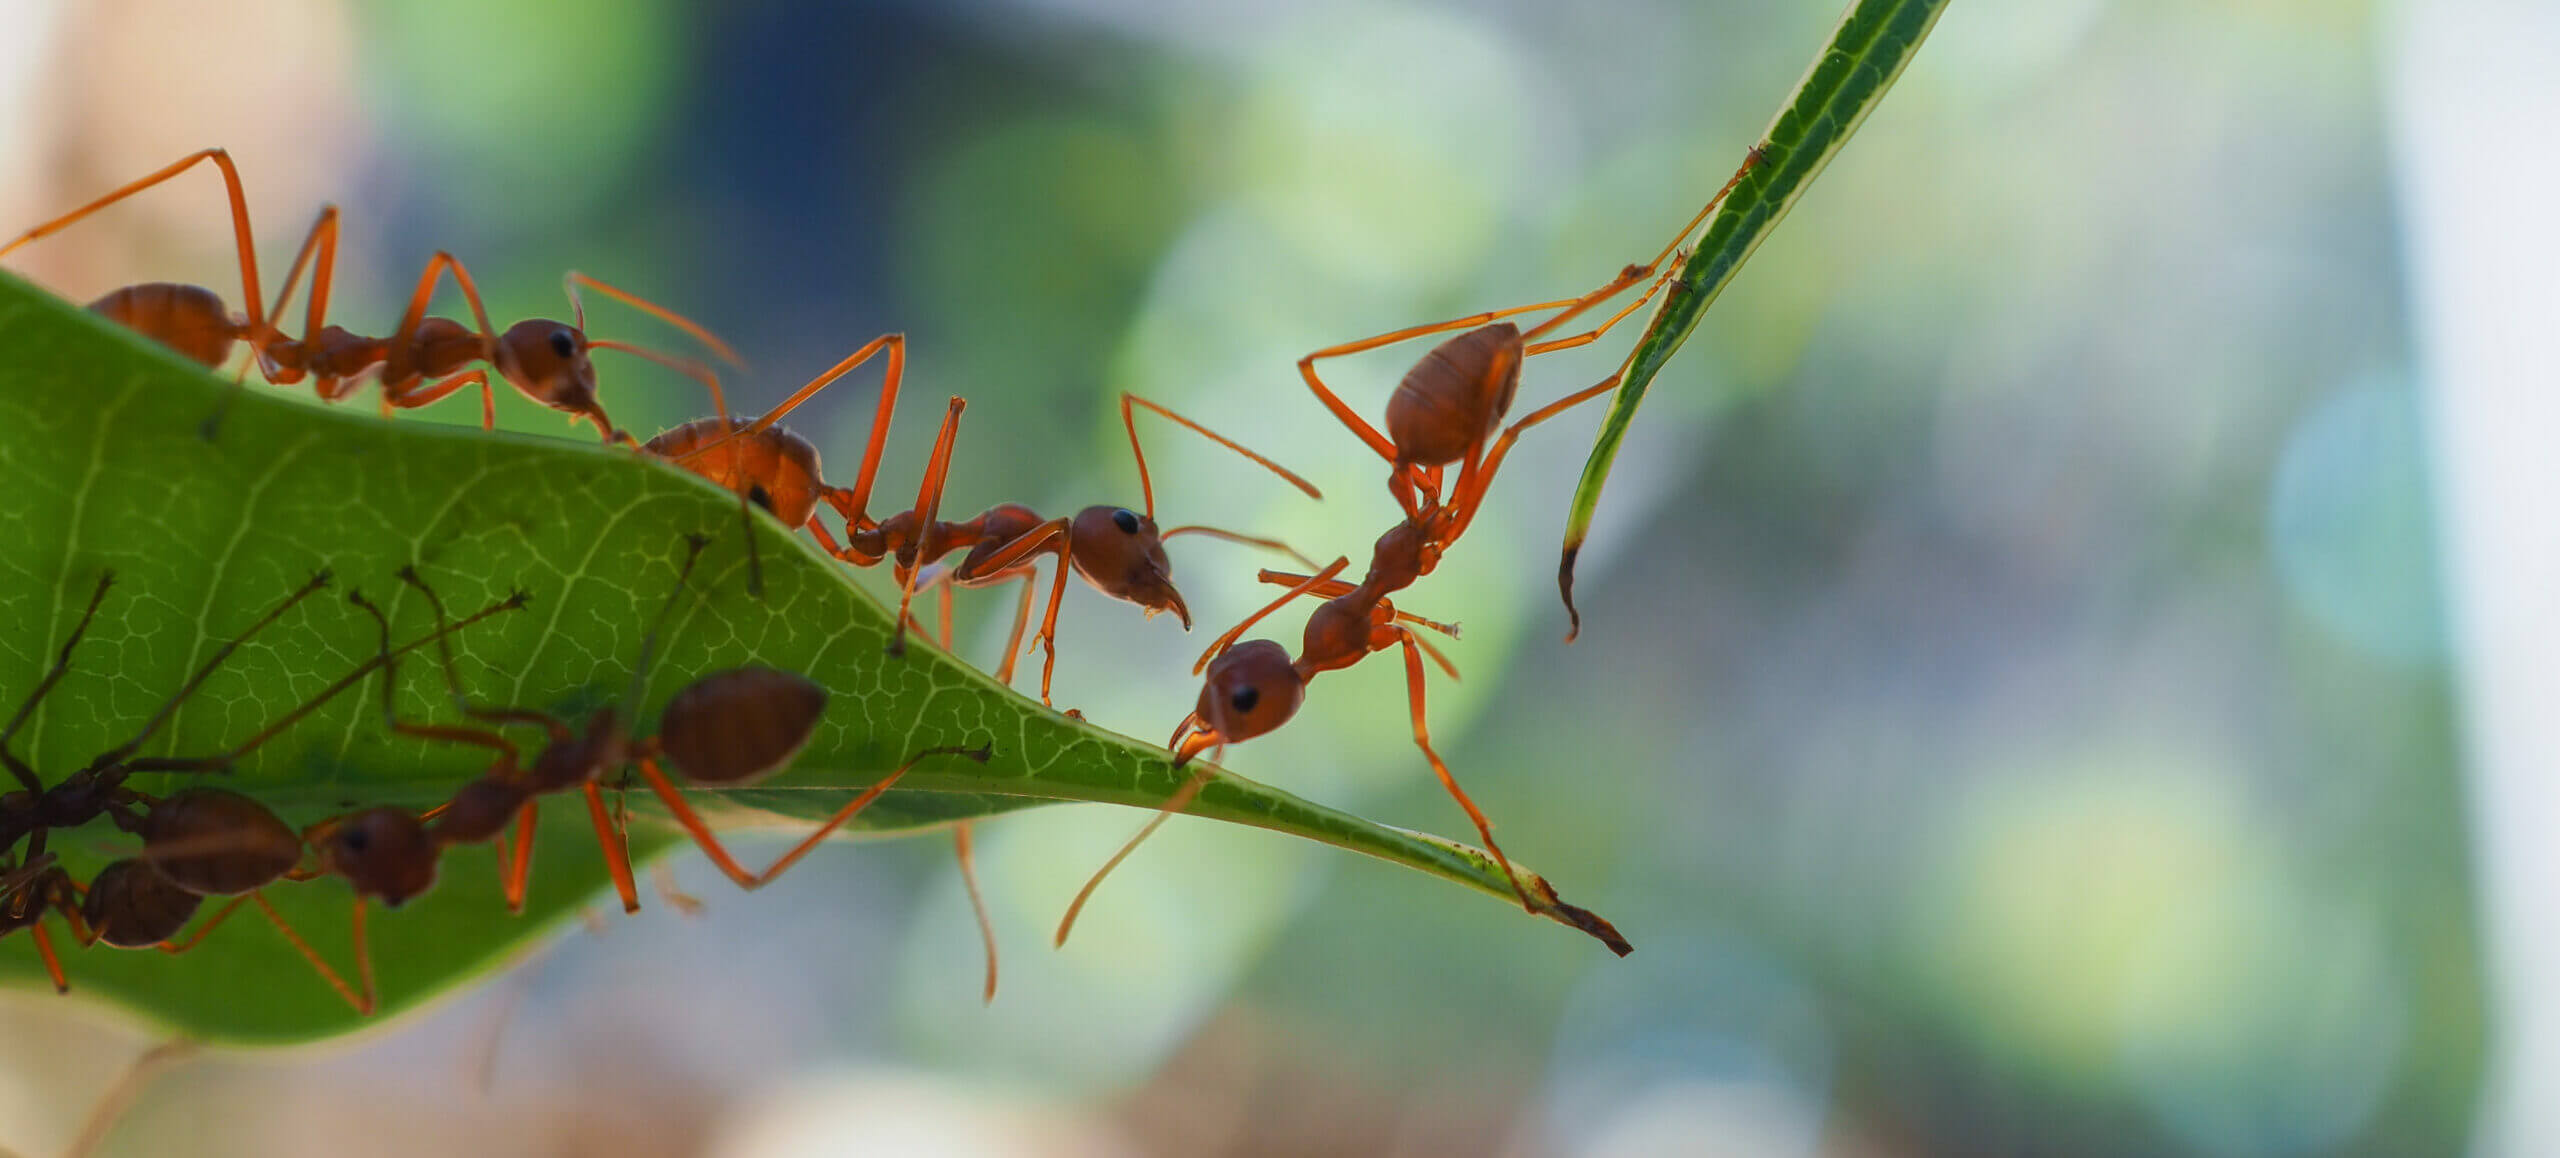 Ants working together